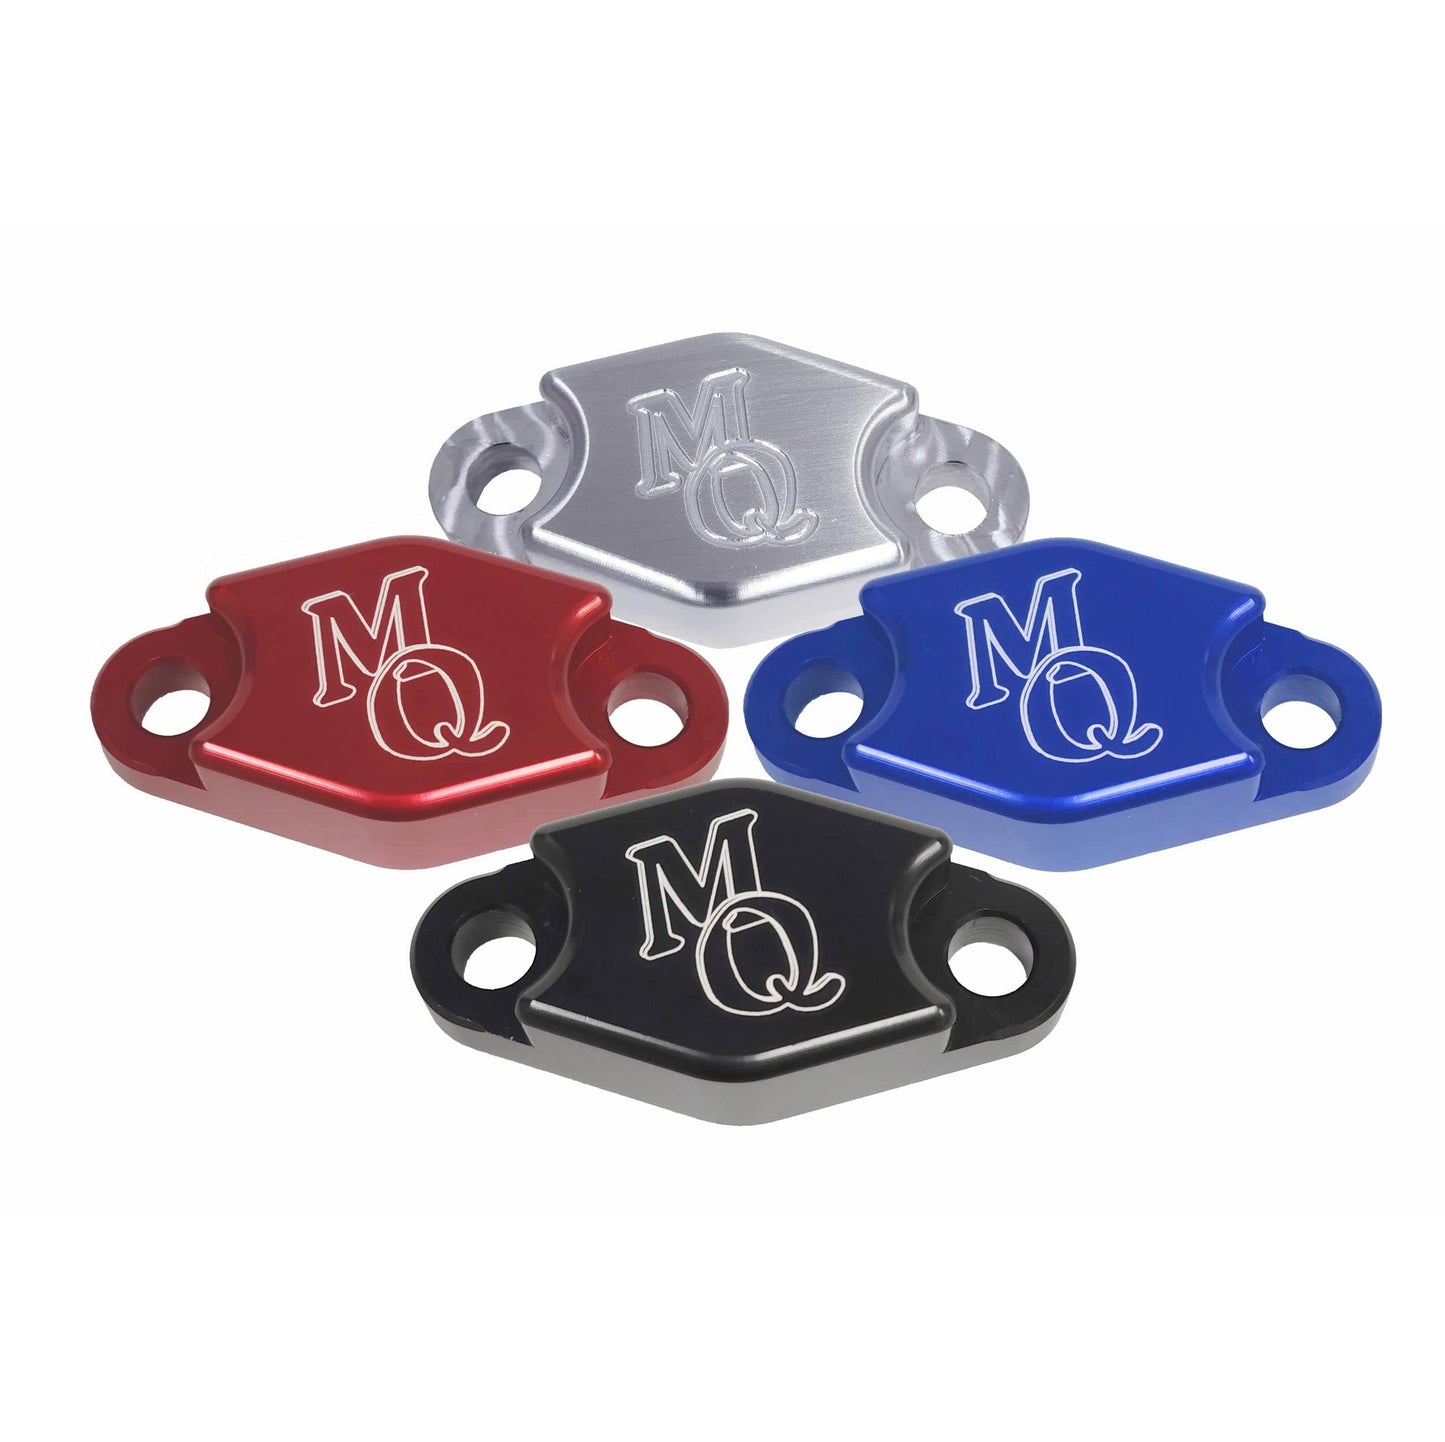 Modquad Parking Brake Blockoff Plate, Billet Aluminum with MQ Logo, Assorted Colors *NEW*